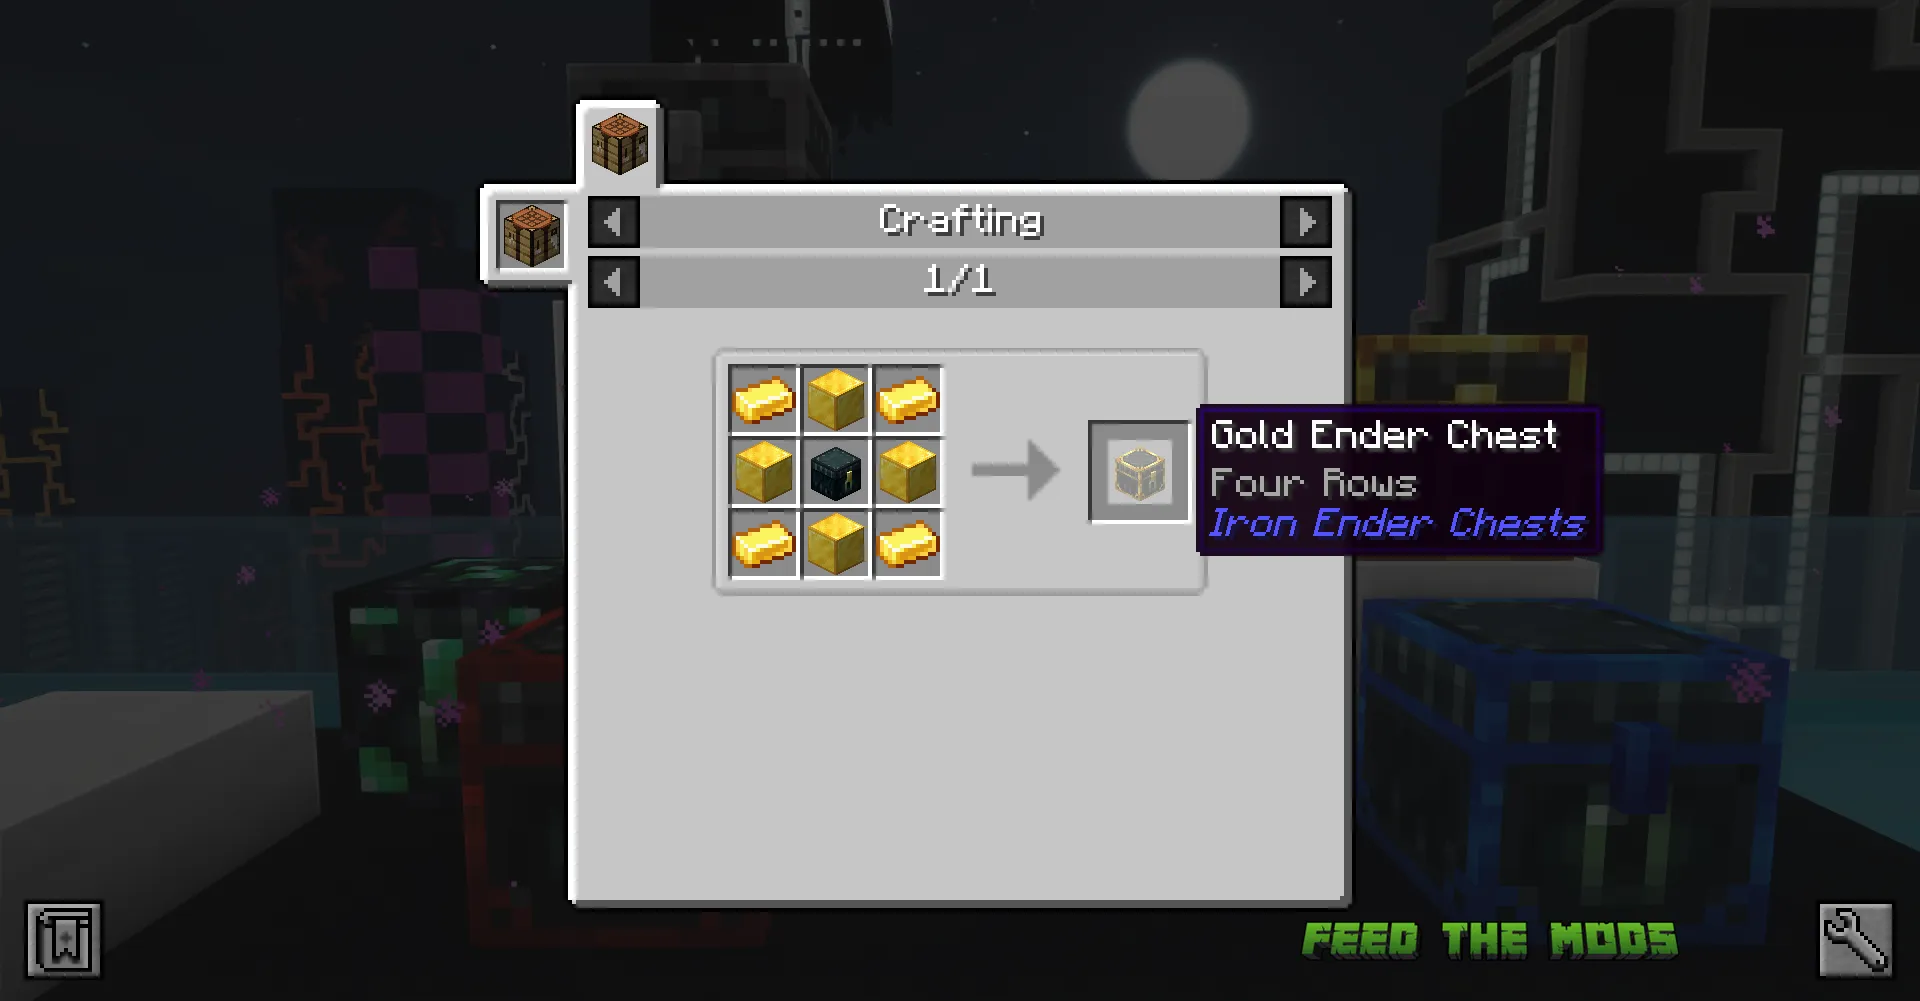 Iron Ender Chests Mod 22 - FTM